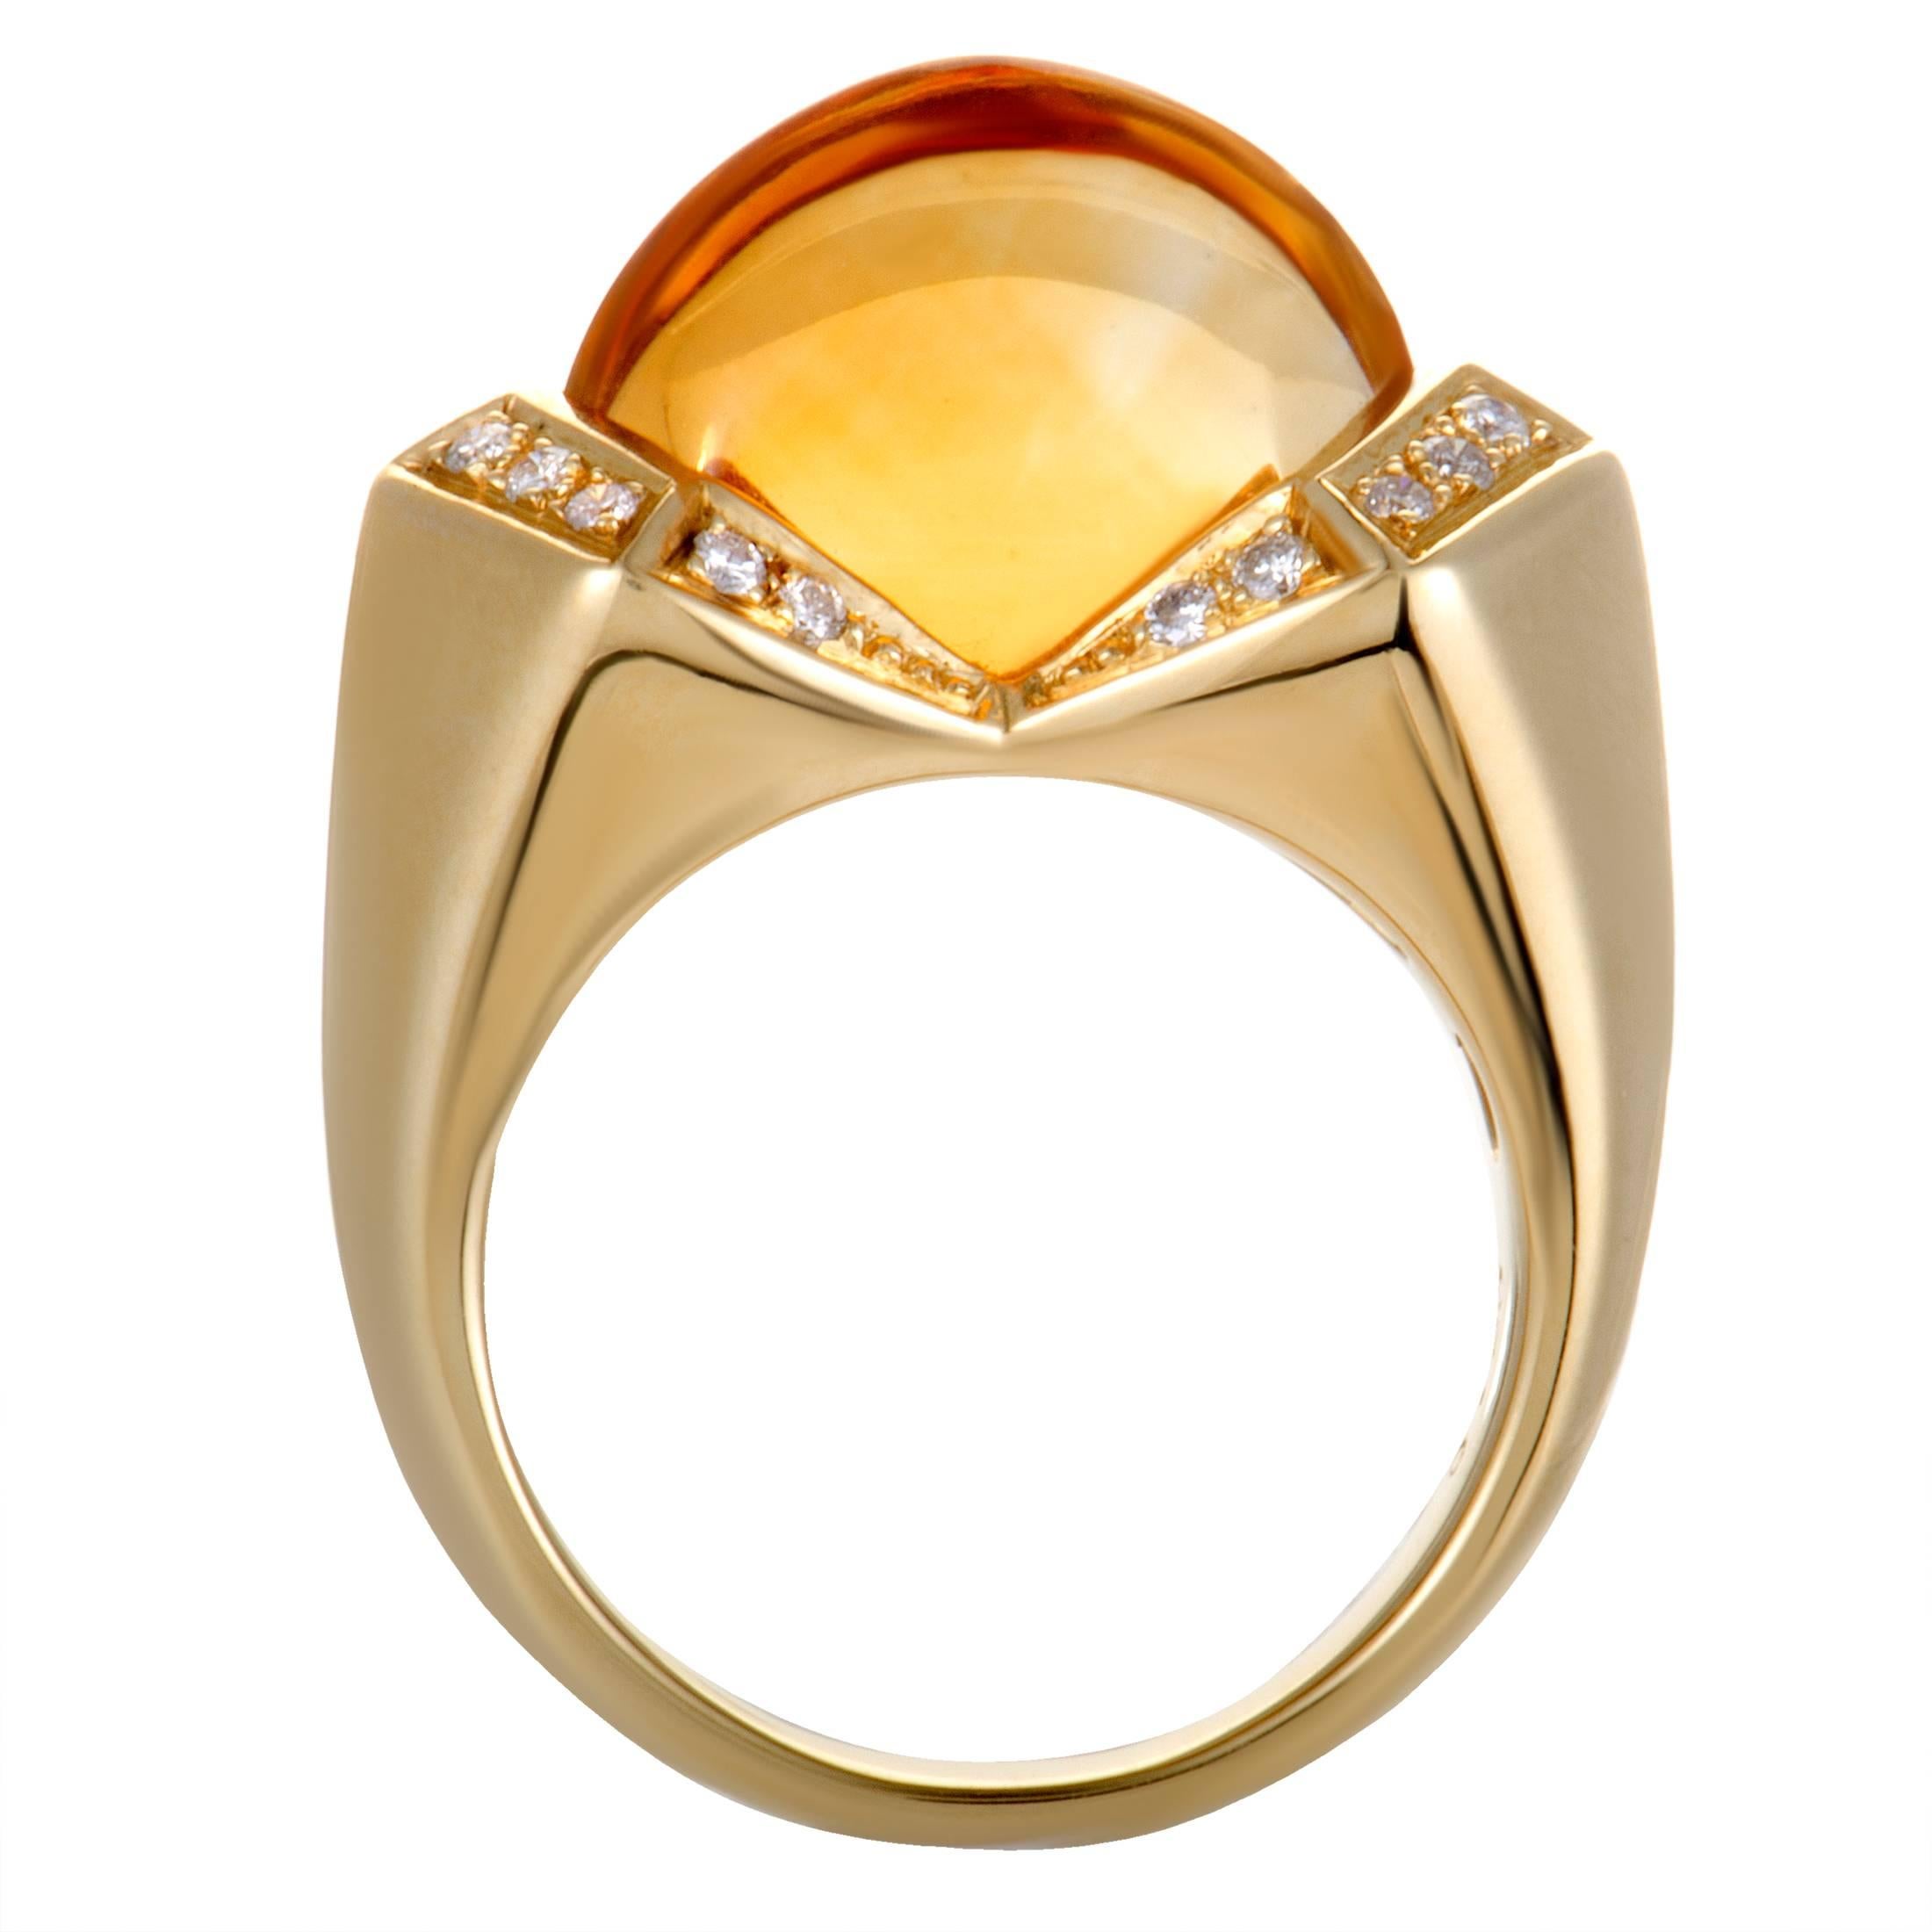 Featuring the ever-alluring combination of warm citrine and radiant 18K yellow gold, this ring offers an endearingly elegant look. The citrine weighs 7.73 carats and it is accentuated by sparkly diamonds that total 0.20 carats.
Ring Size: 6.75
Ring